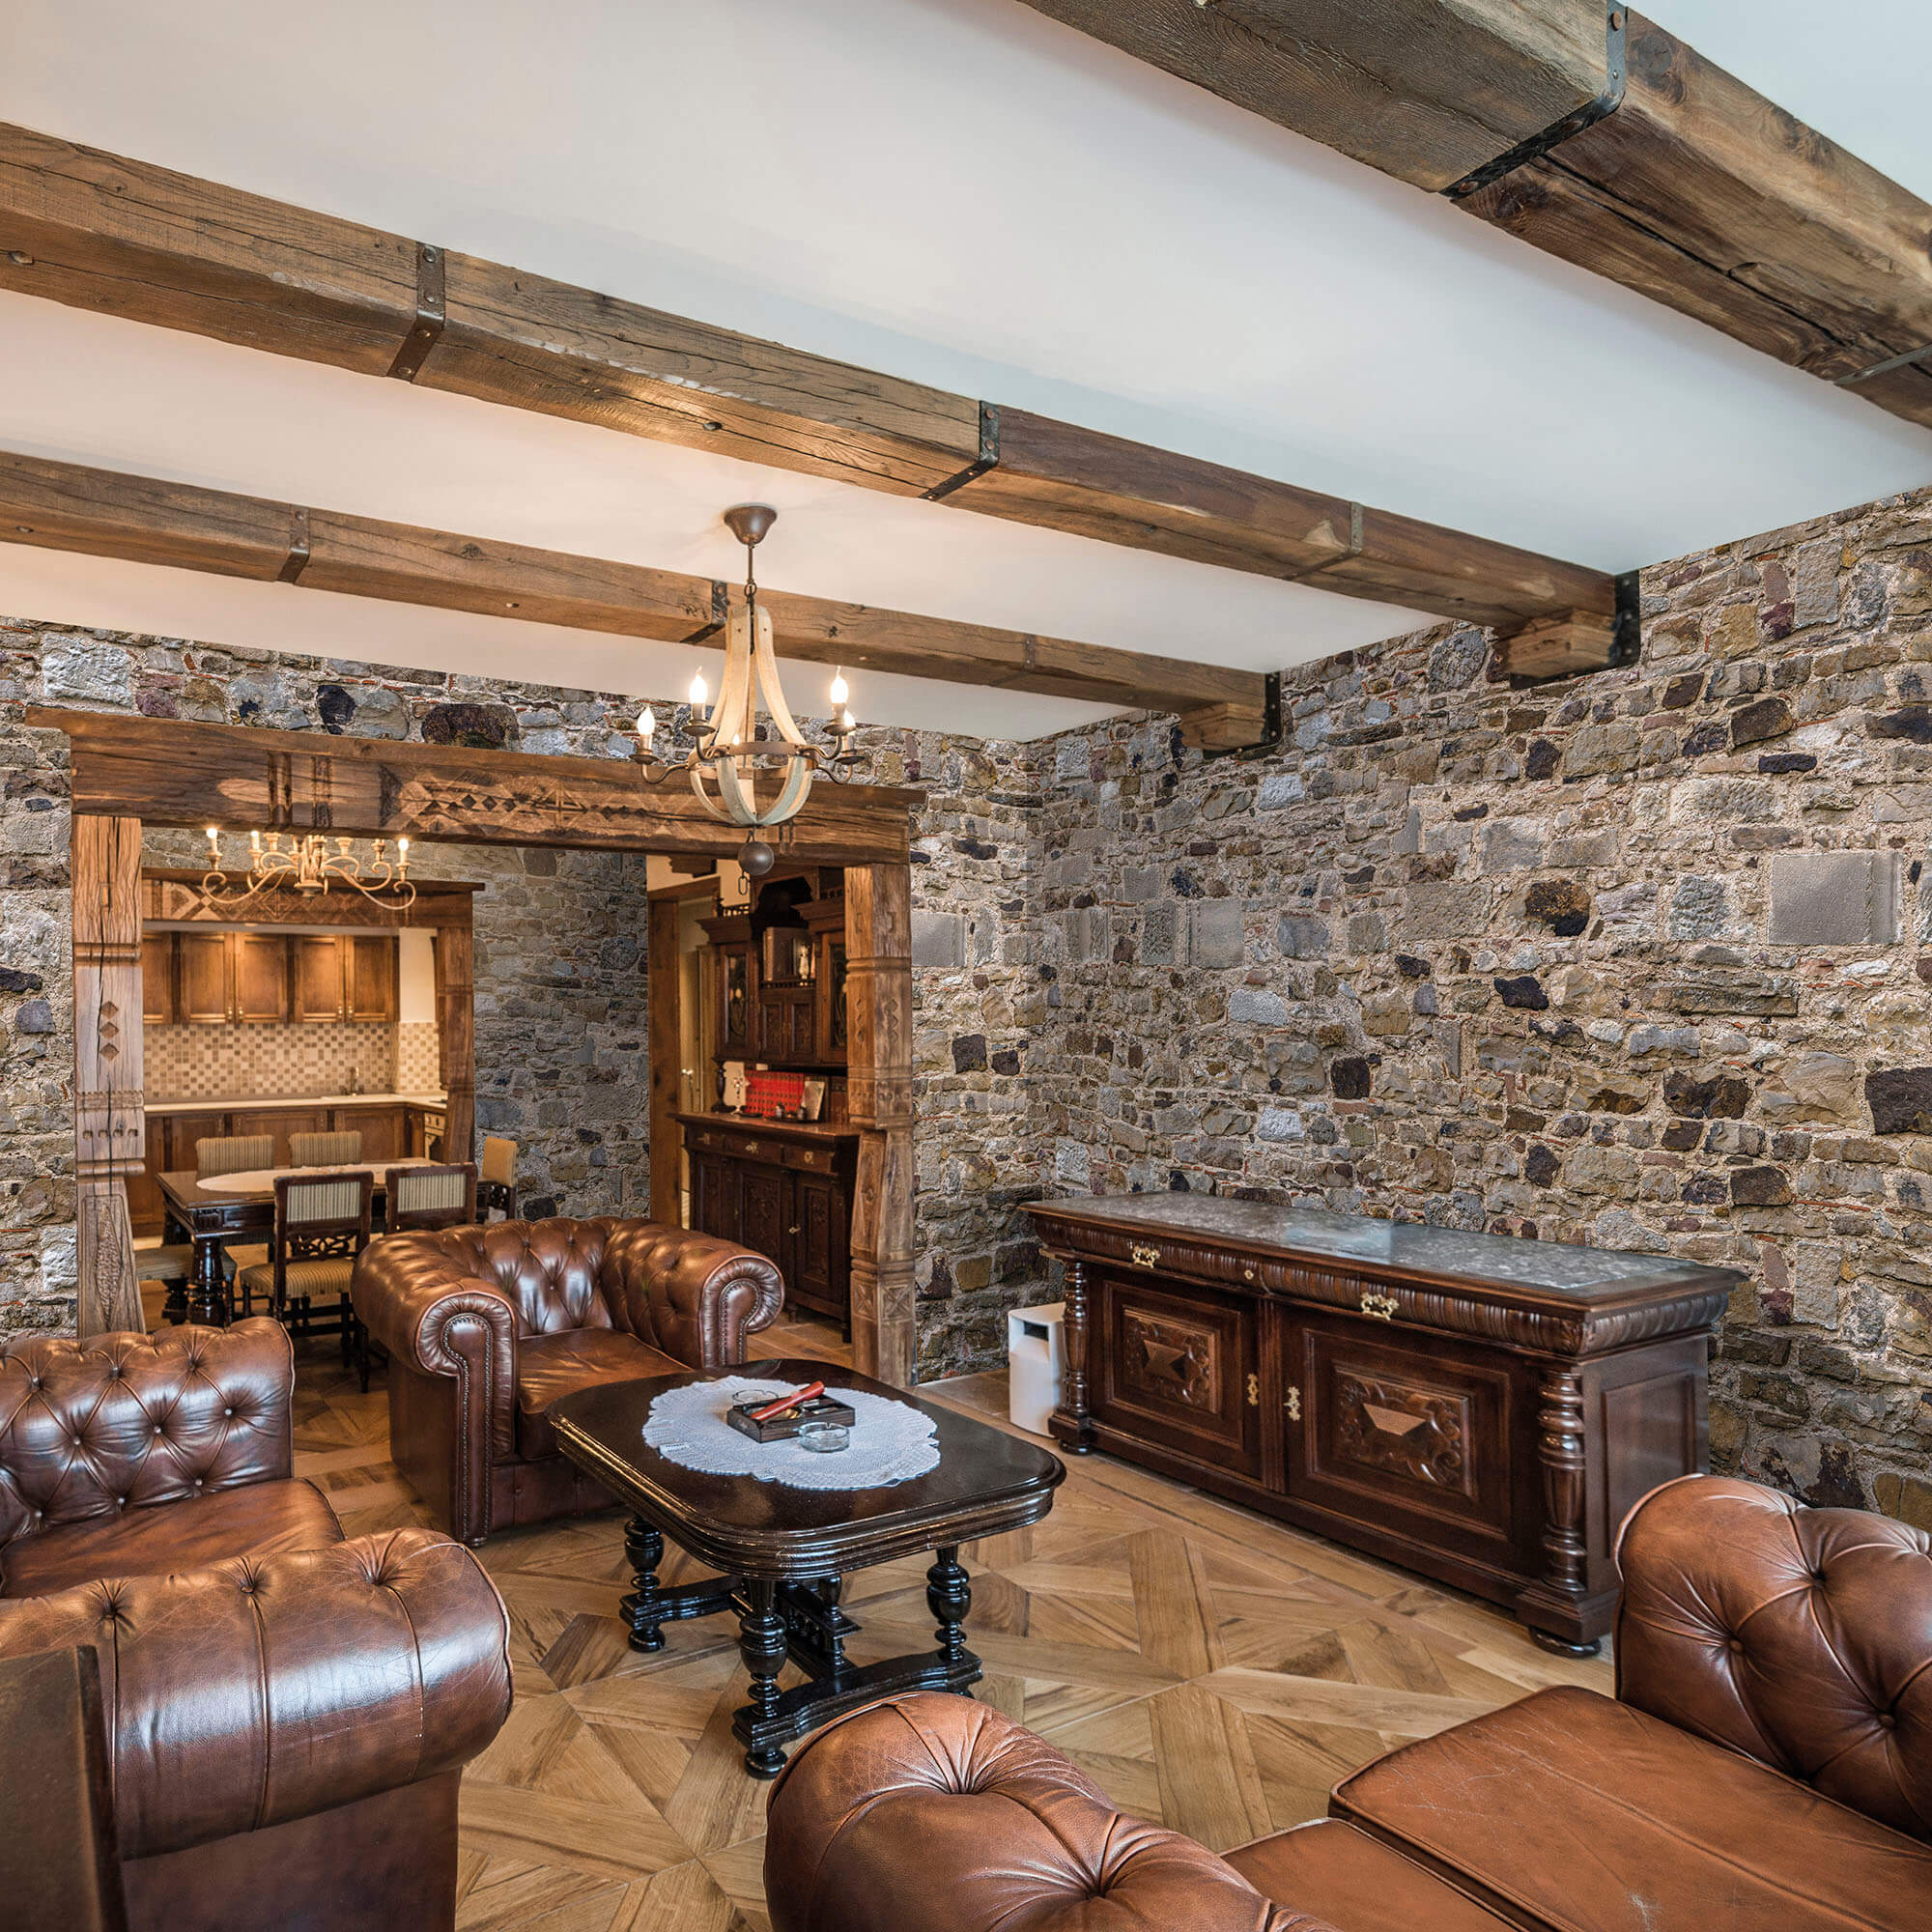 Living room interior with wooden ceiling beams and stoned walls